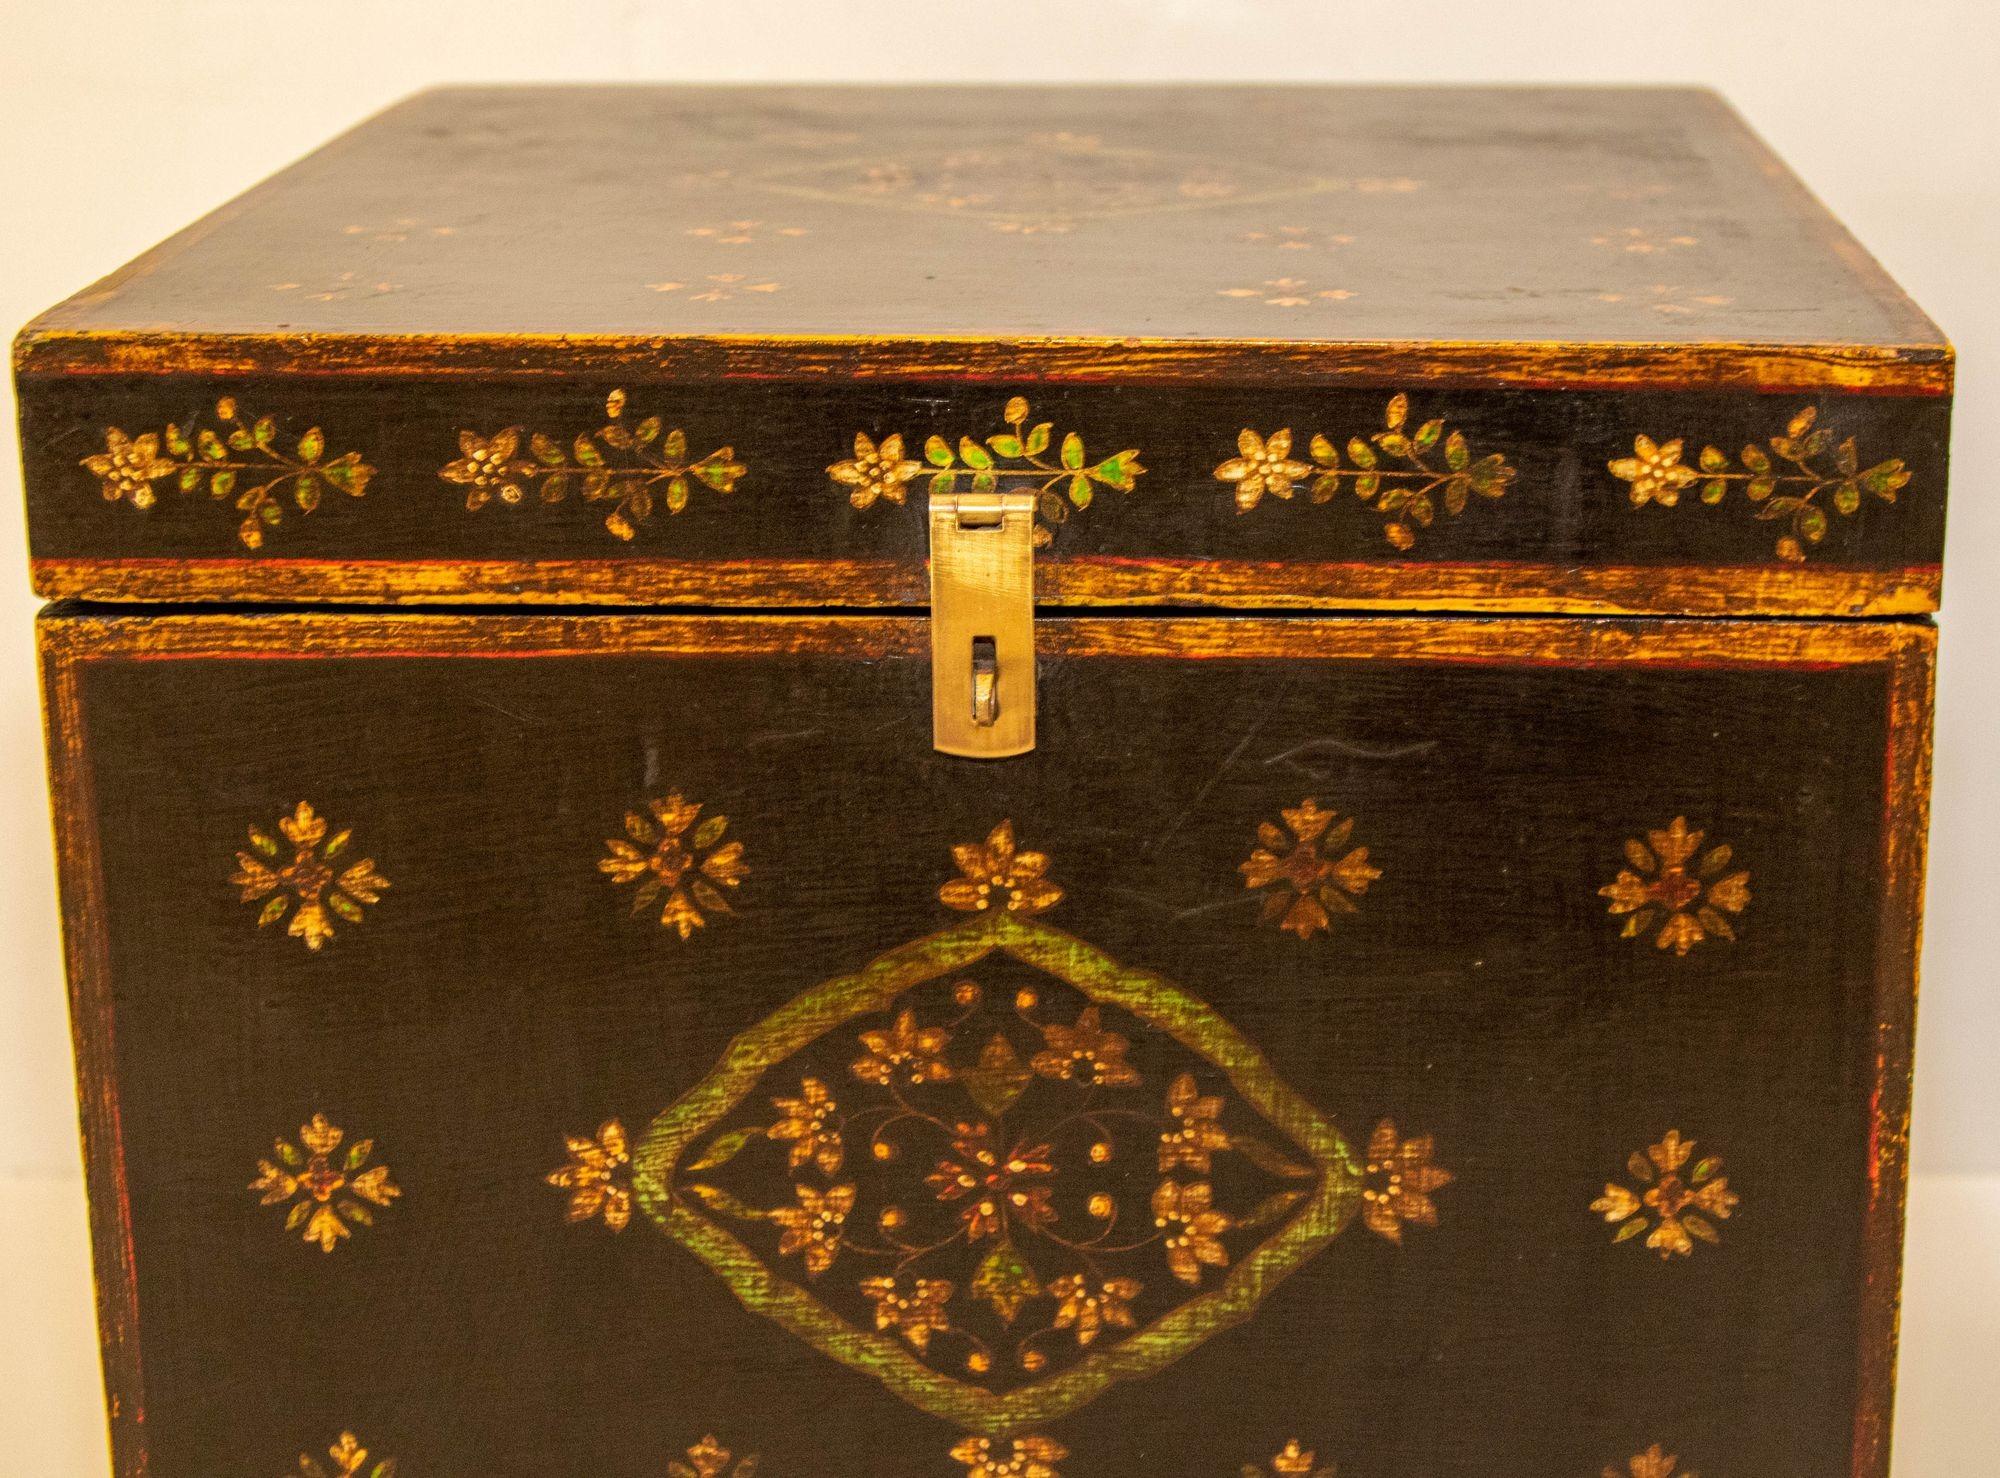 20th Century 1950s Mughal Style Folk Art Lacquer Hand Painted Decorative Storage Trunks